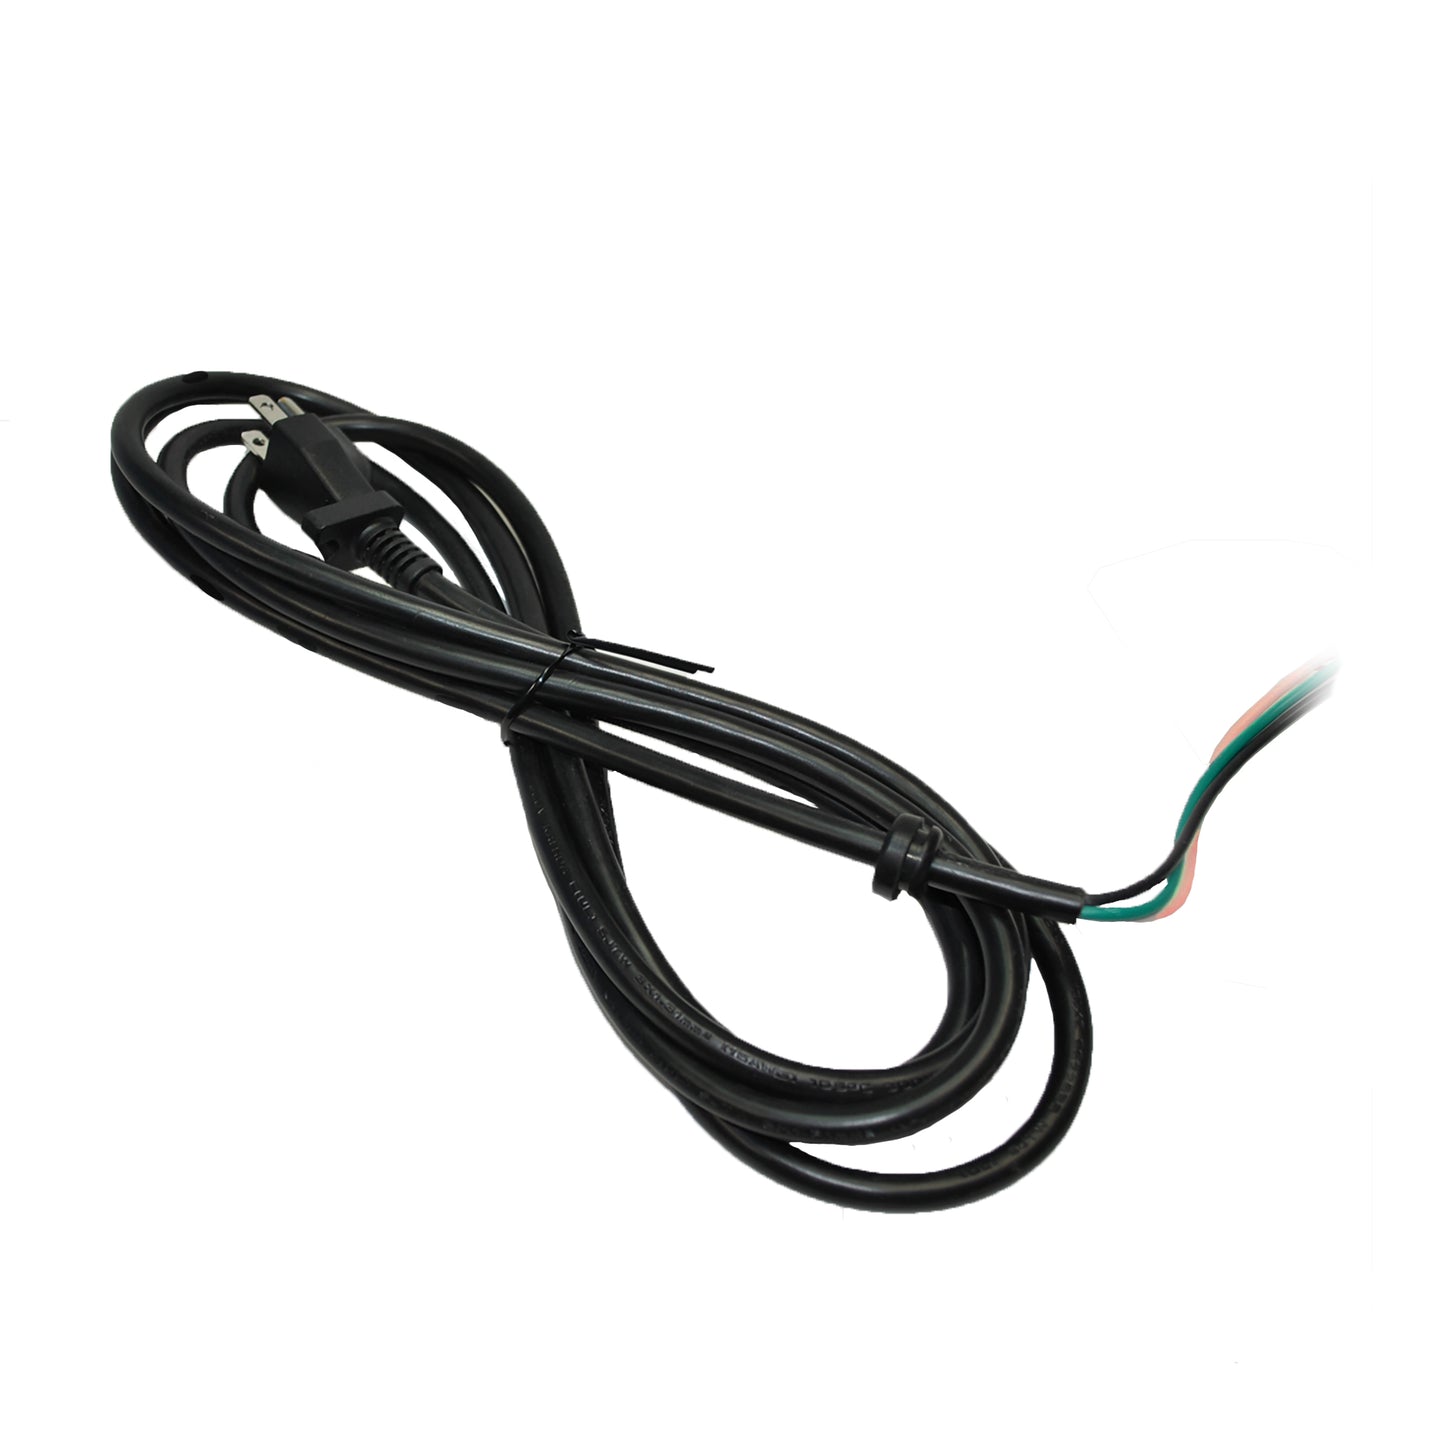 Power Cord for P-230AT Air Mover